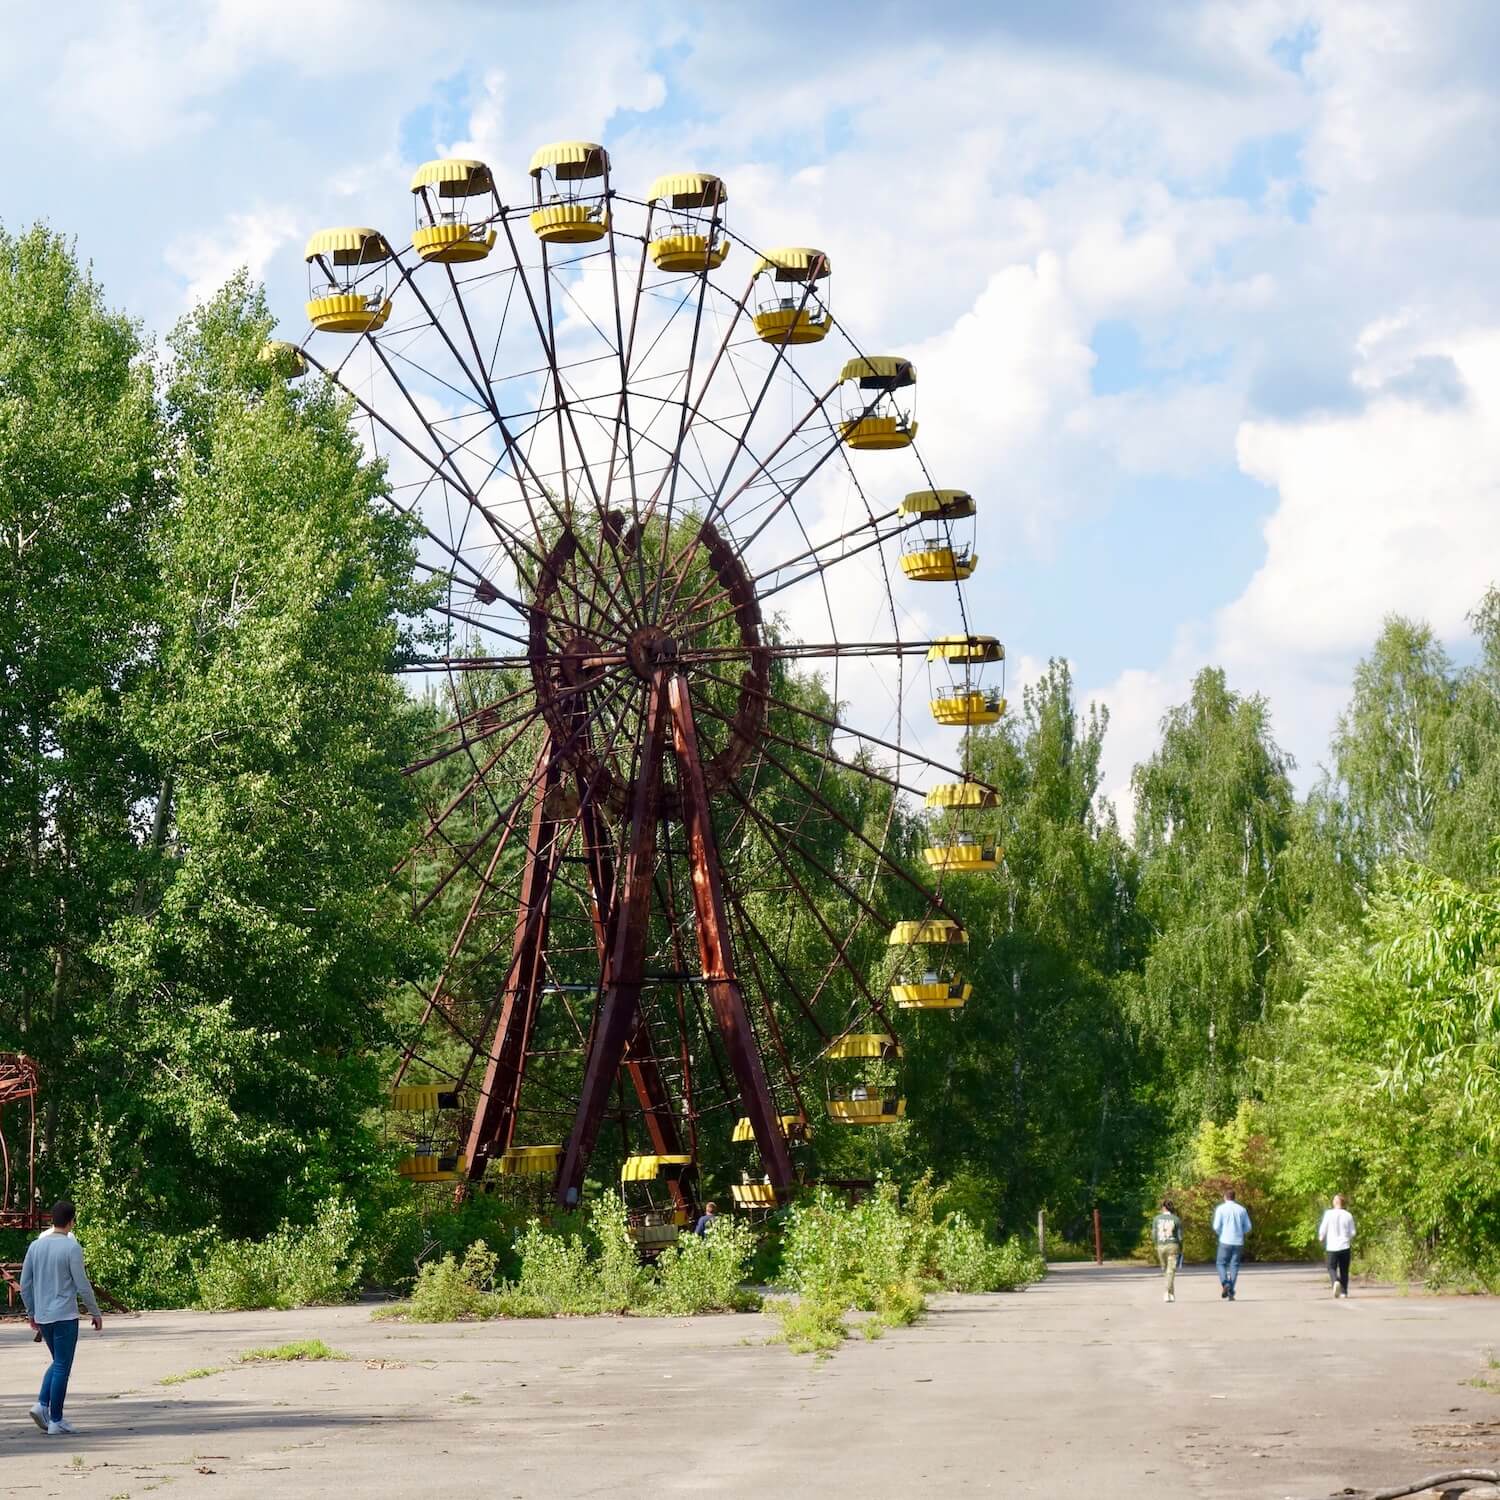 Ferris wheel that is still assembled in the ghost town of Prypyat, which was abandoned following the April 1986 explosion of Chernobyl Reactor #4